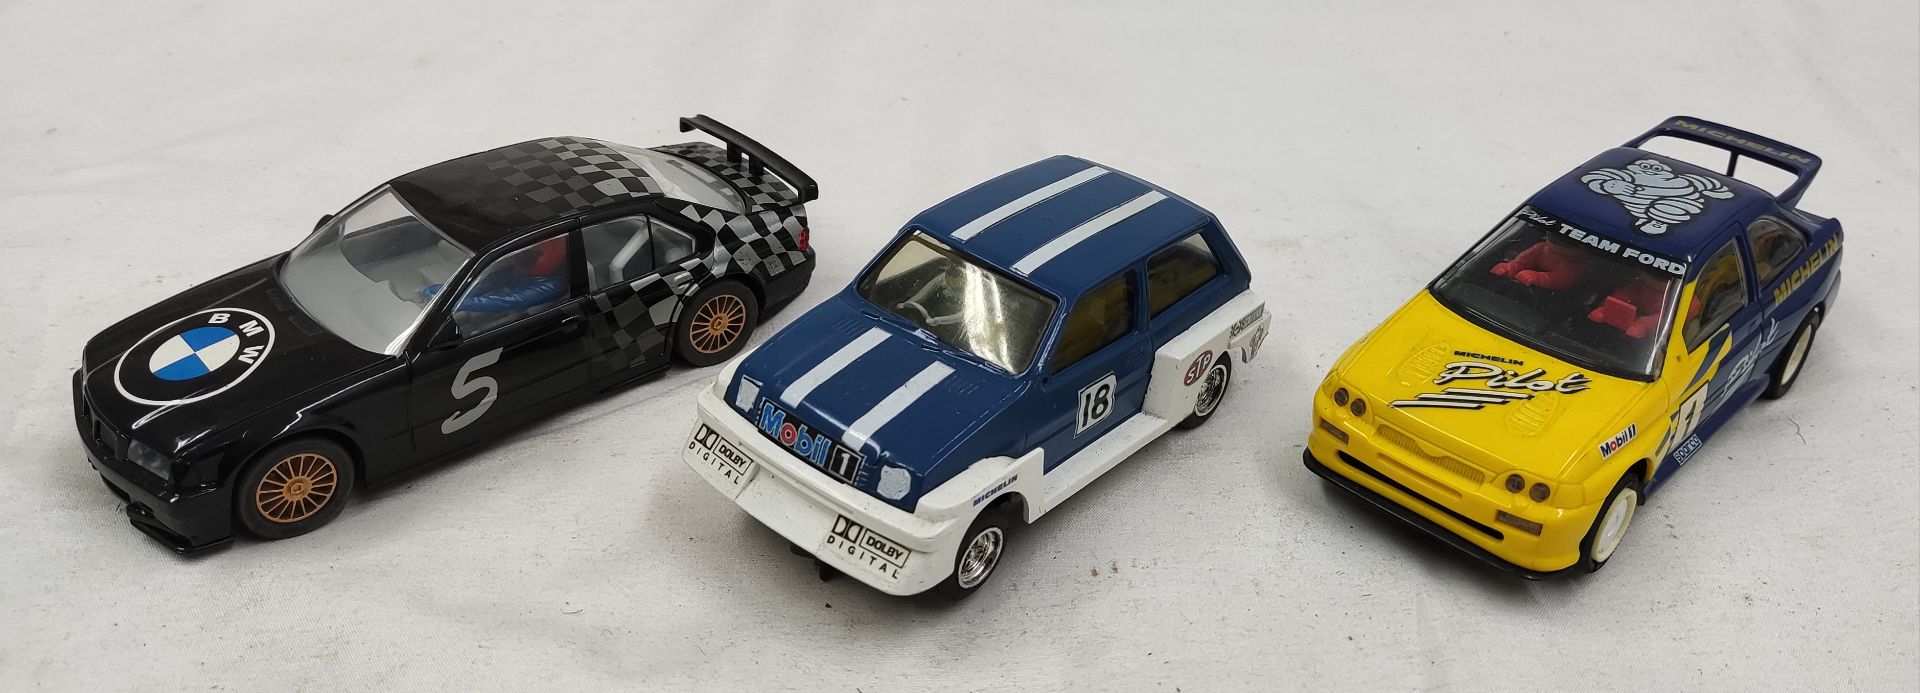 3 x Retro Scalextric Cars - BMW, Metro and Ford - Tested and Working - Used - CL444 - NO VAT ON - Image 2 of 8